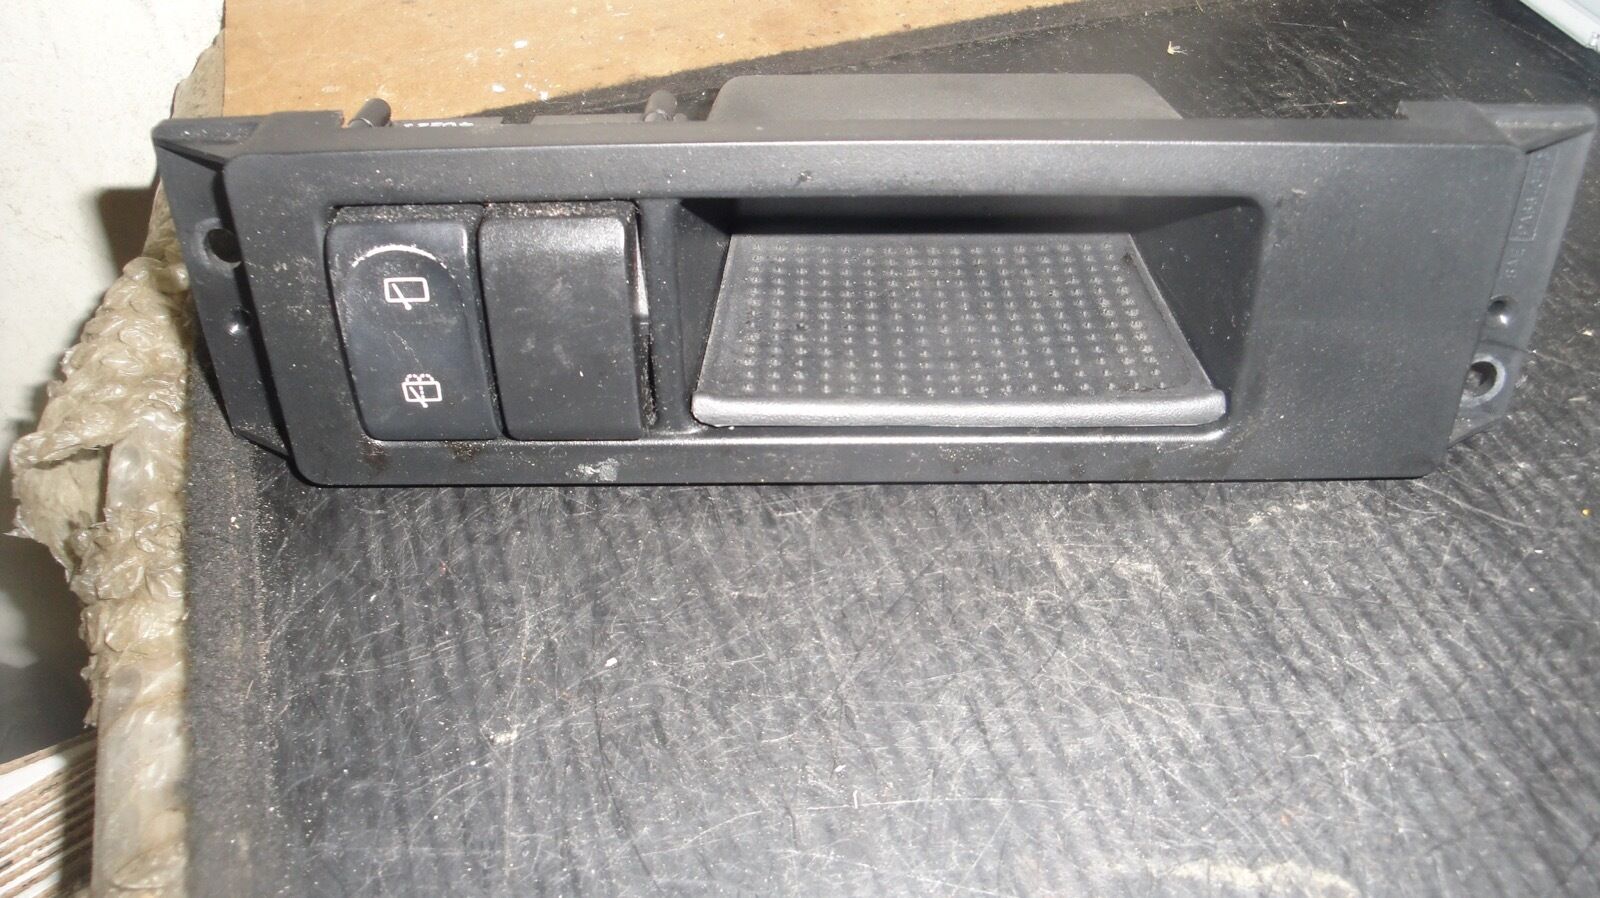 02 03 04 05 06 07 Buick Rendezvous Wiper Switch Panel Cubby Storage 10329971